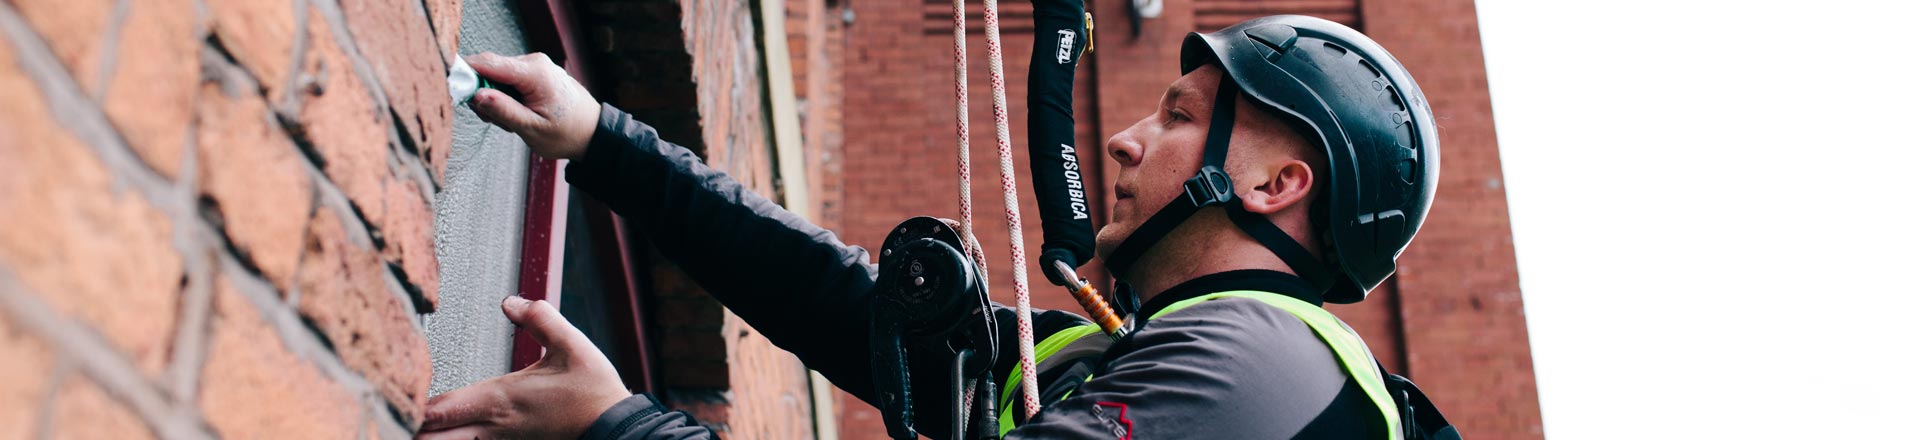 Abseiling/Rope Access Window Cleaning in Nottingham - HCS Cleaning Services